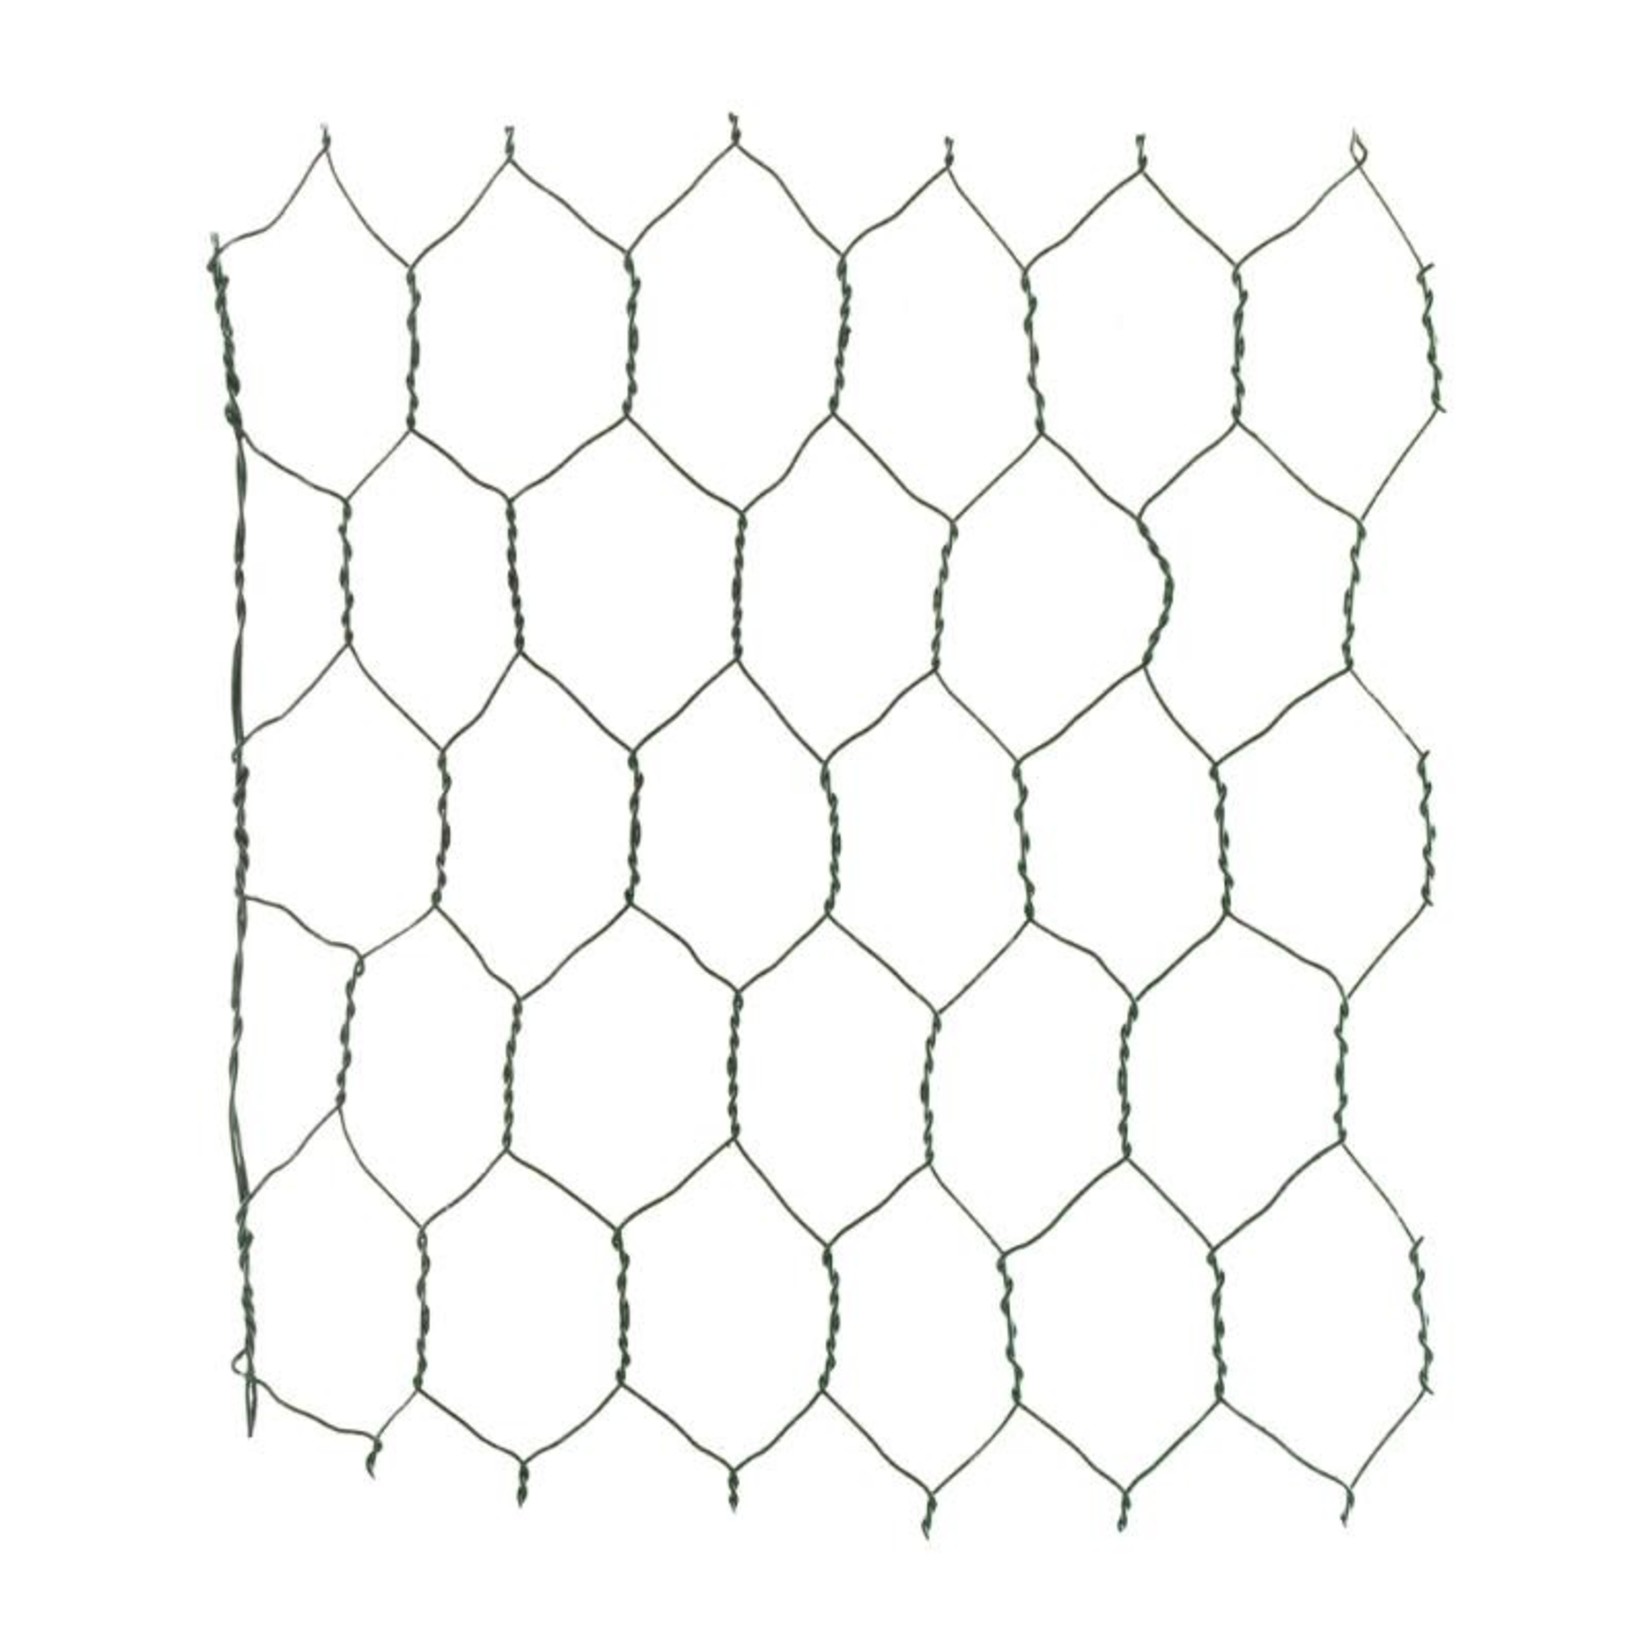 18" Florist Netting, Green, 150 ft./roll chicken wire BOX CAN BE MARKED RS3604